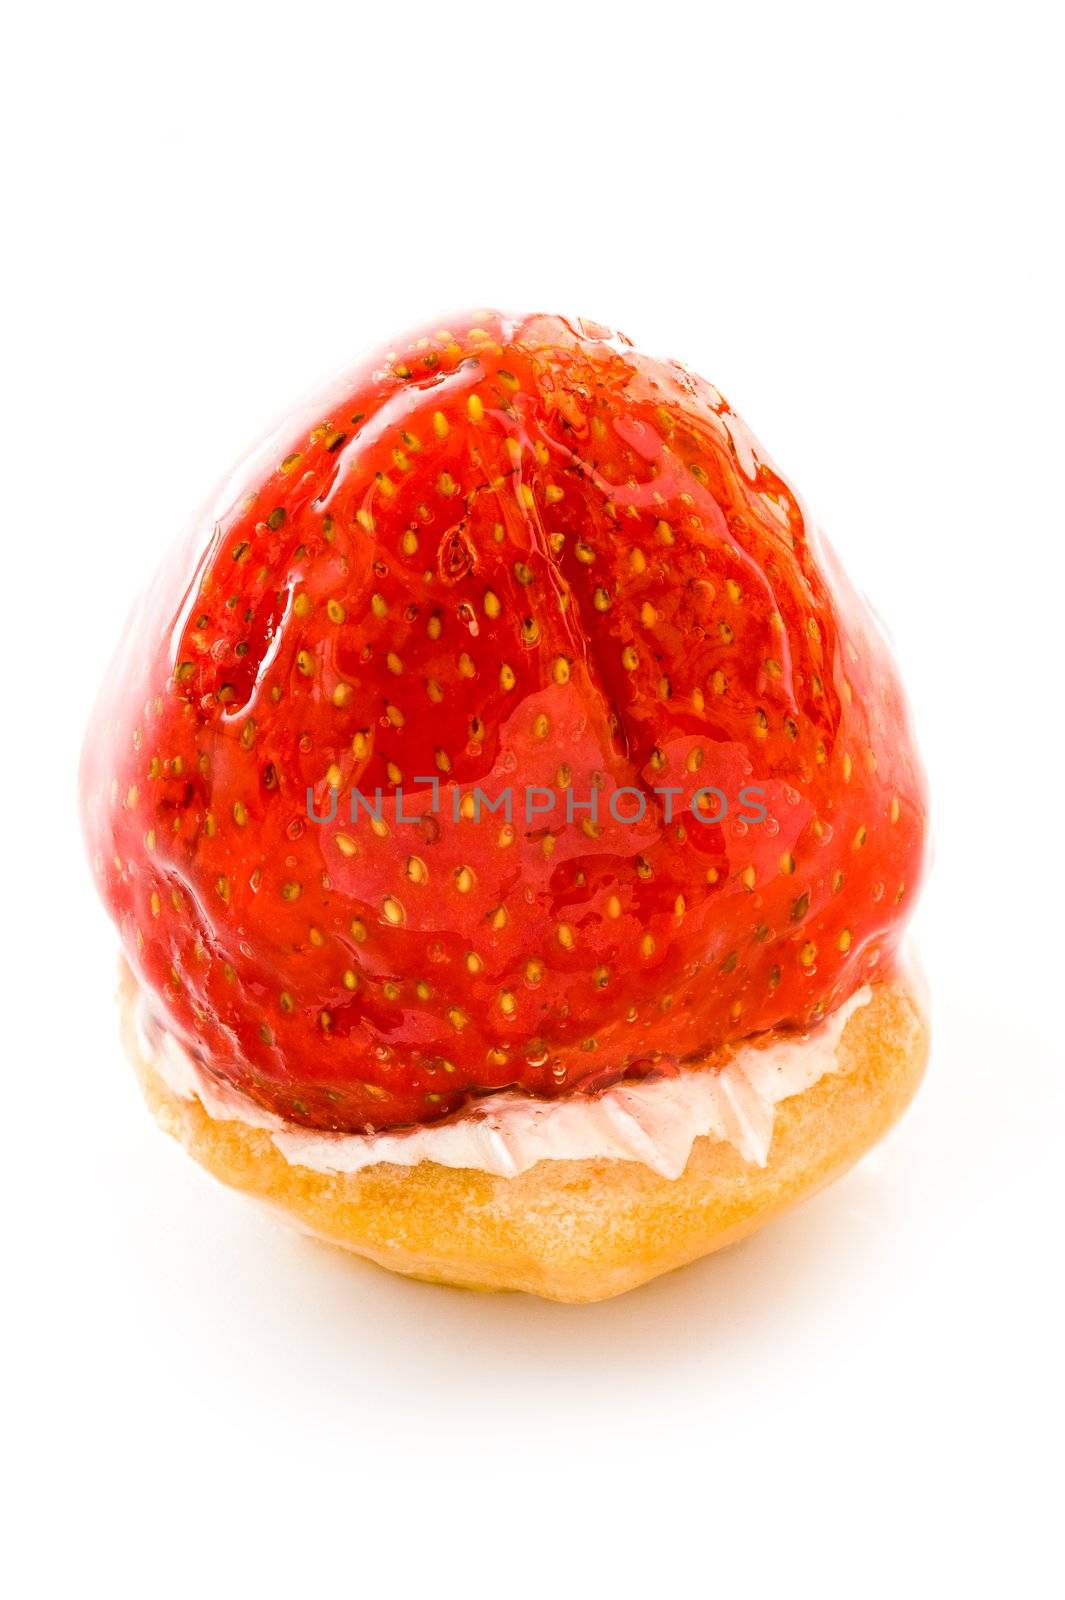 One small cake decorated with the big strawberry close up on a white background
